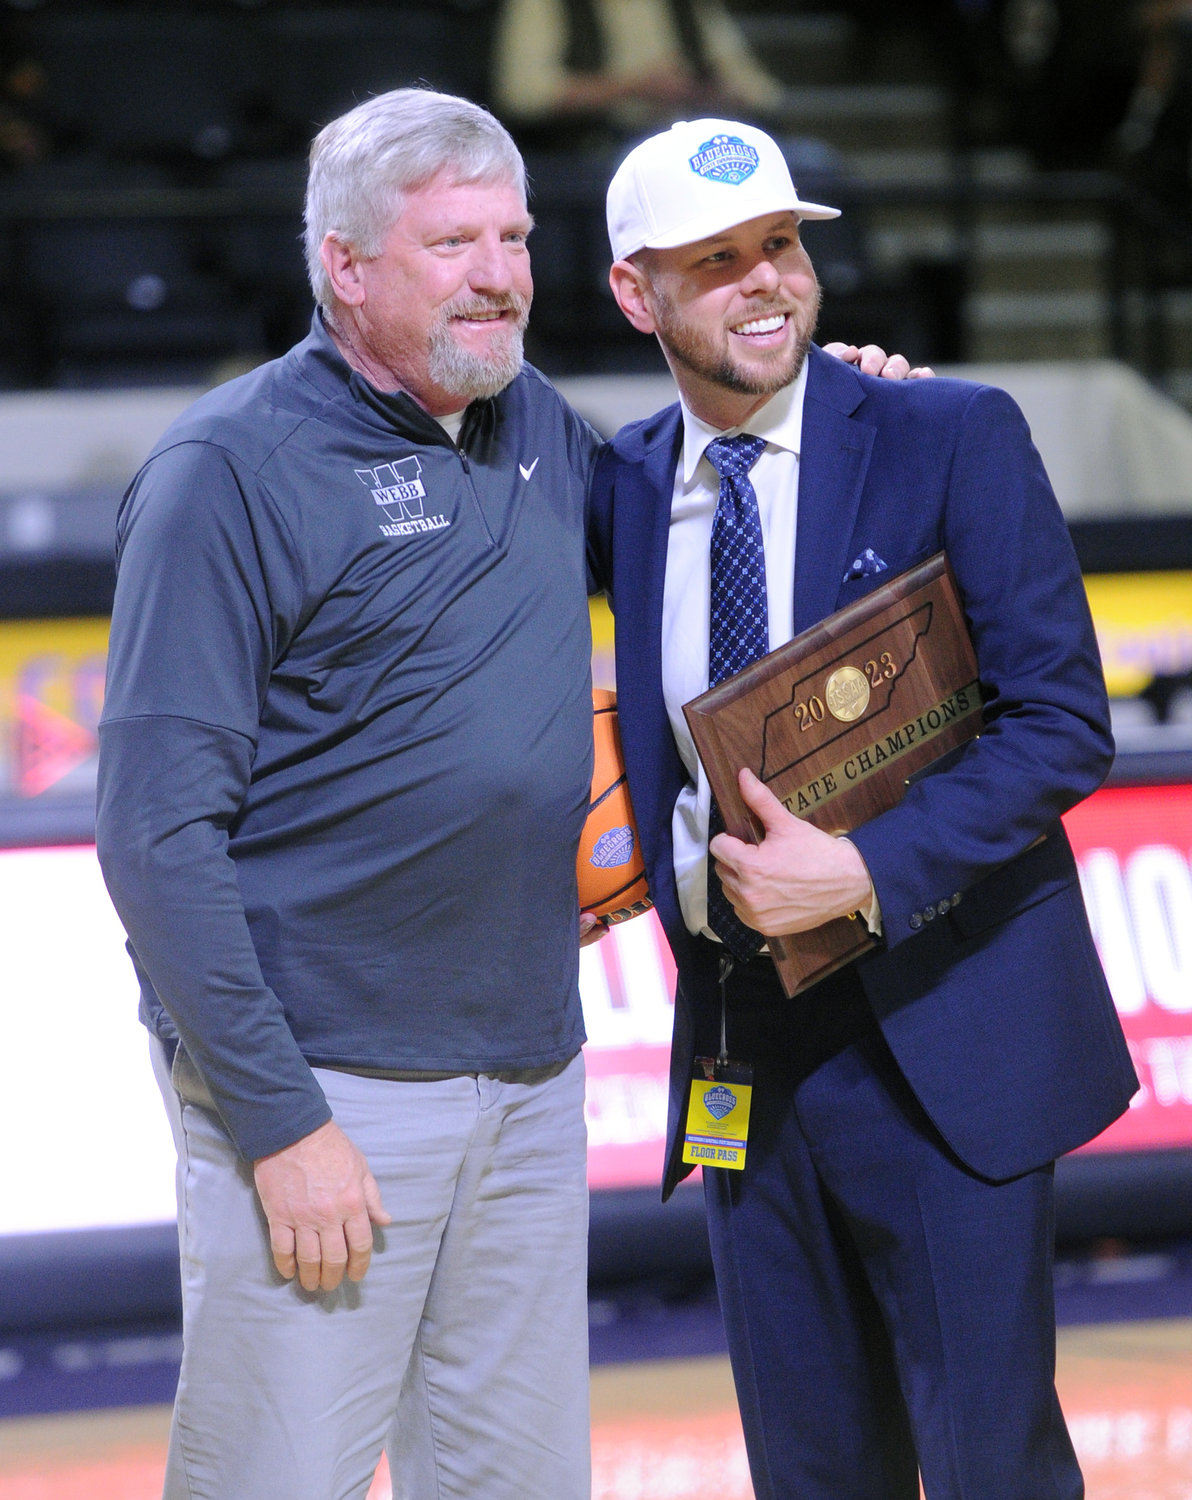 Coach Matthew Shewmake is presented with a plaque after winning the Division II Class A state championship on Saturday.